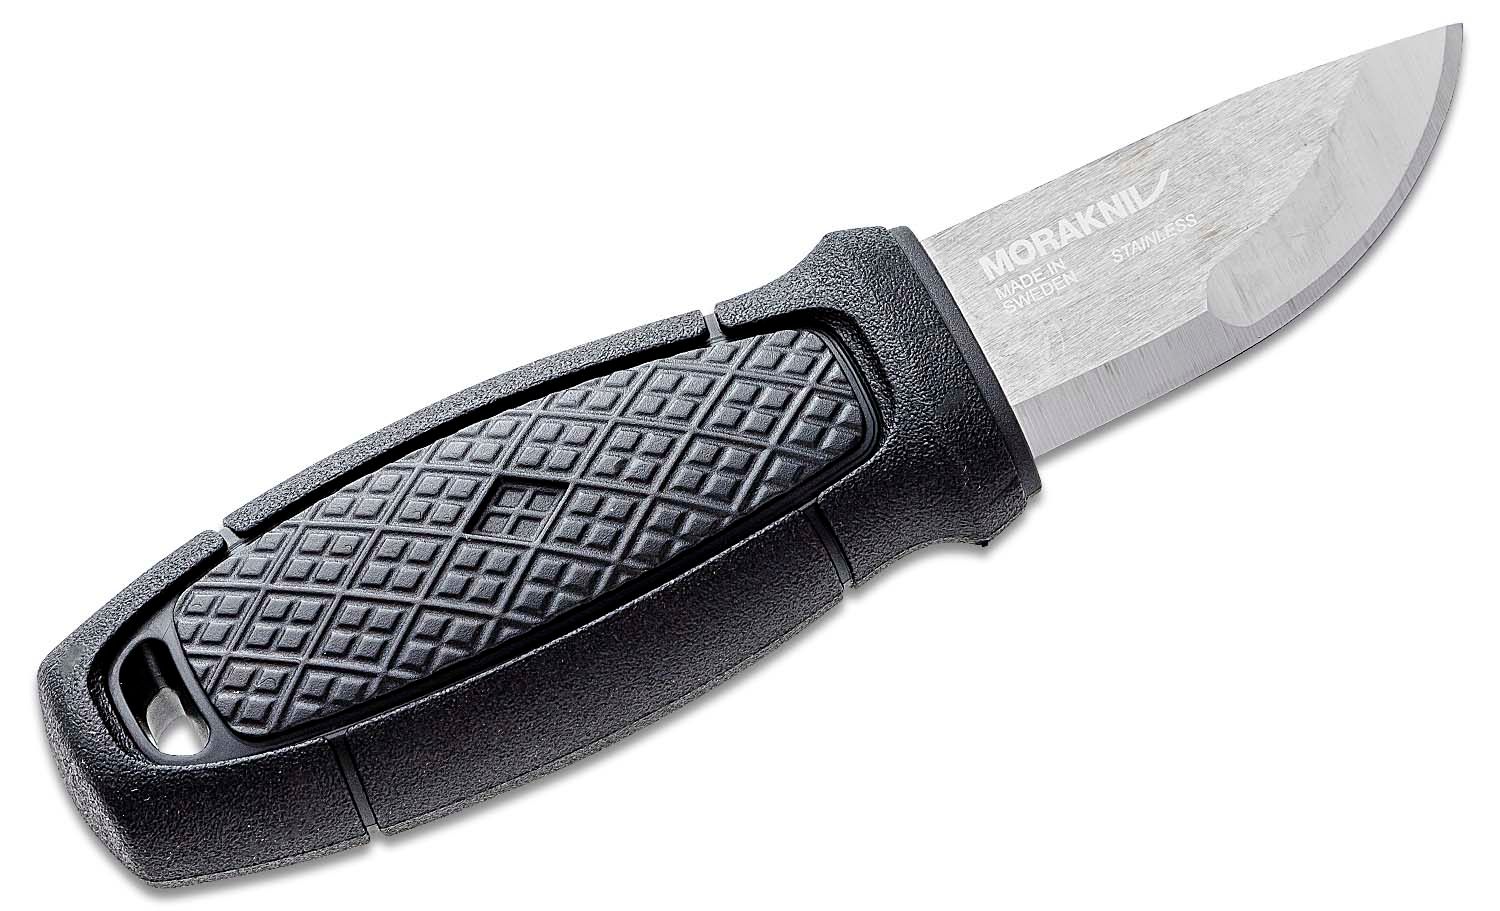 Morakniv Eldris Pocket-Size Fixed-Blade Knife With Stainless Steel Blade  and Sheath, 2.3 Inch,Black - Yahoo Shopping